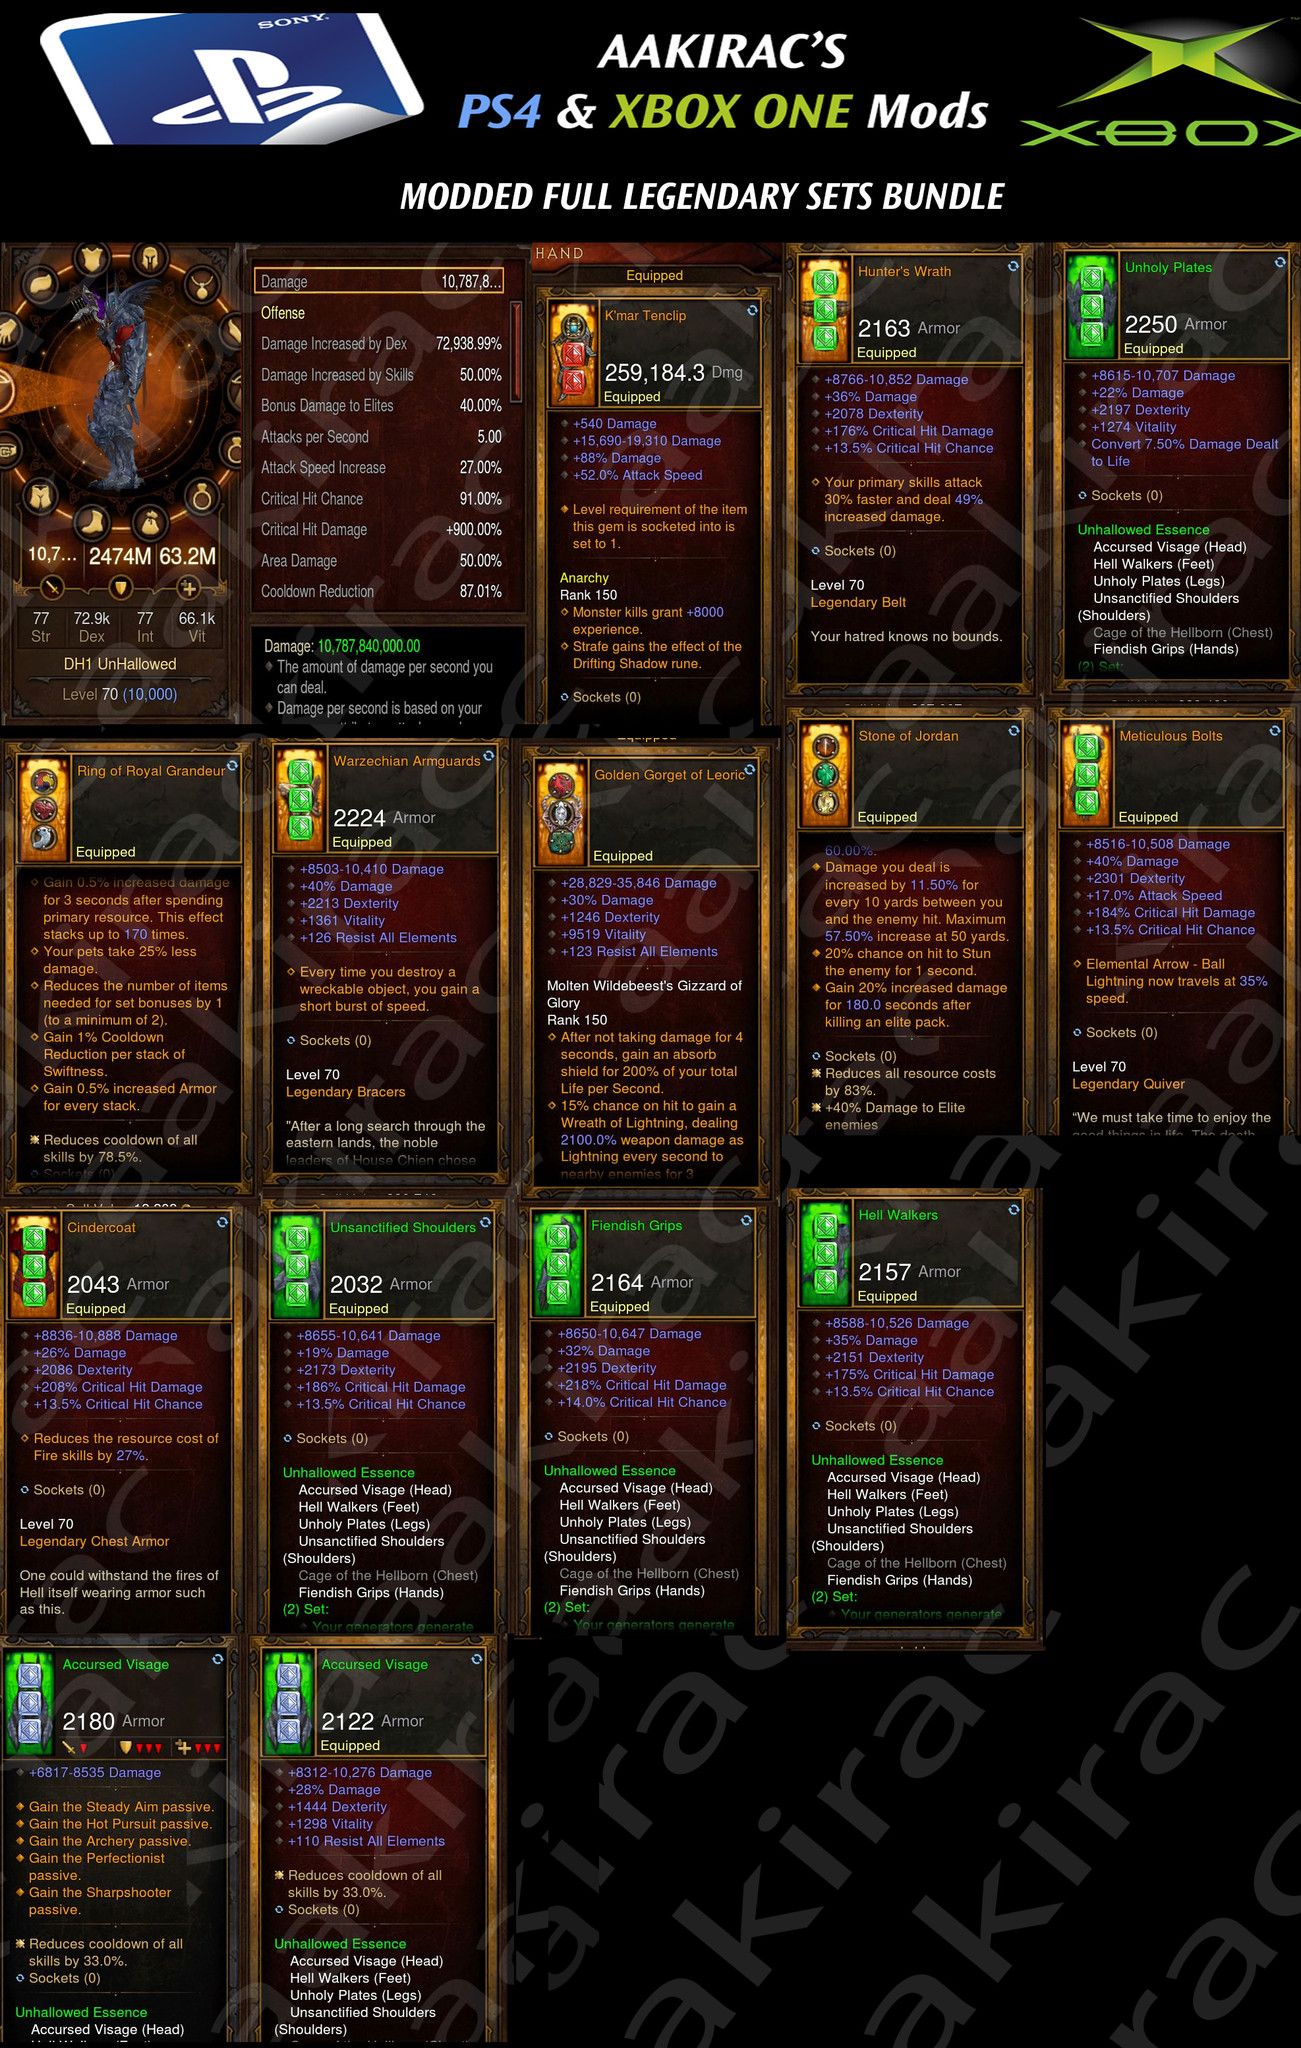 Bundled Deal #1: 4x MODDED Classes 56x Items Total - Barbarian, Demon Hunter, Monk, Witch Doctor-Diablo 3 Mods - Playstation 4, Xbox One, Nintendo Switch